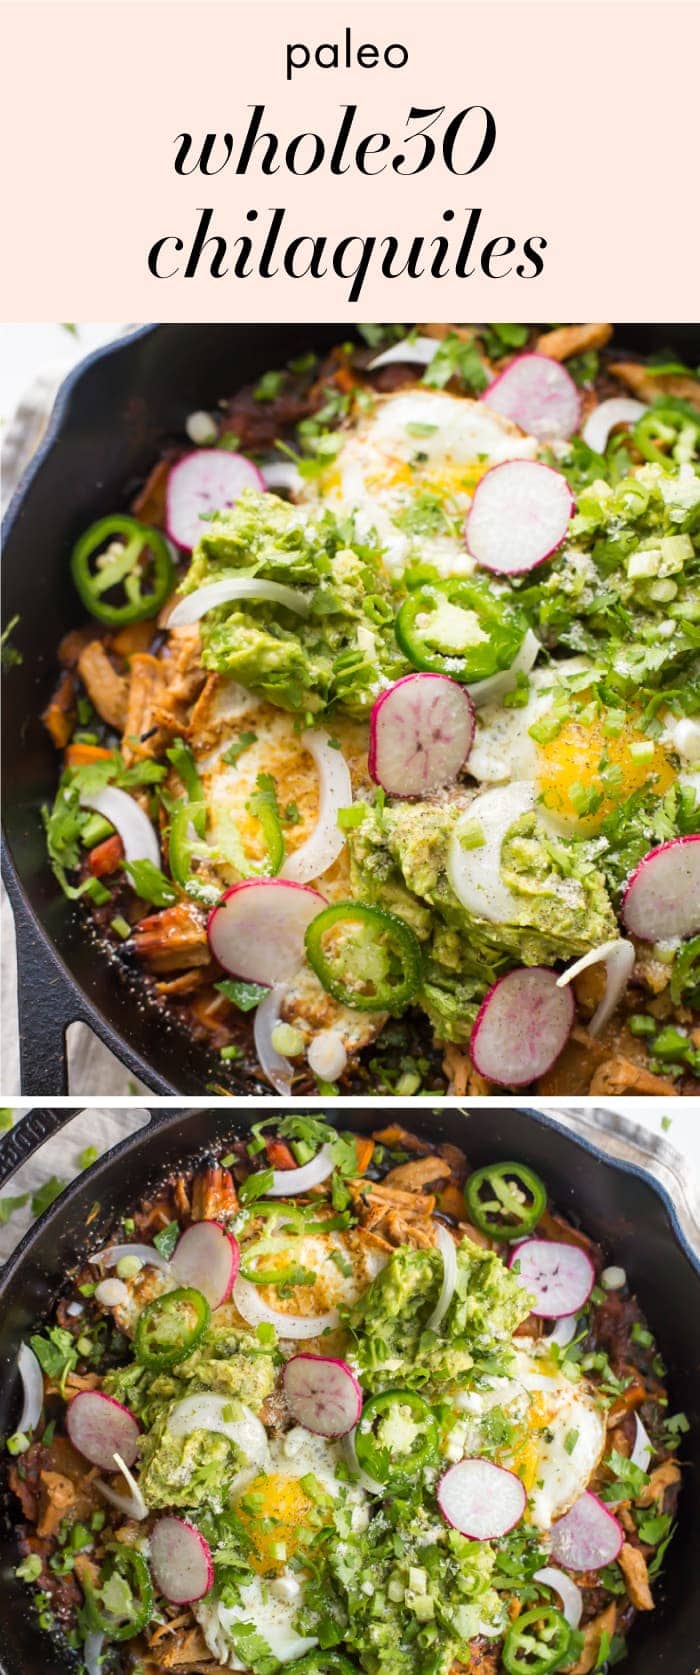 Whole30 Chilaquiles with Sweet Potatoes (Whole30 Mexican Recipes)